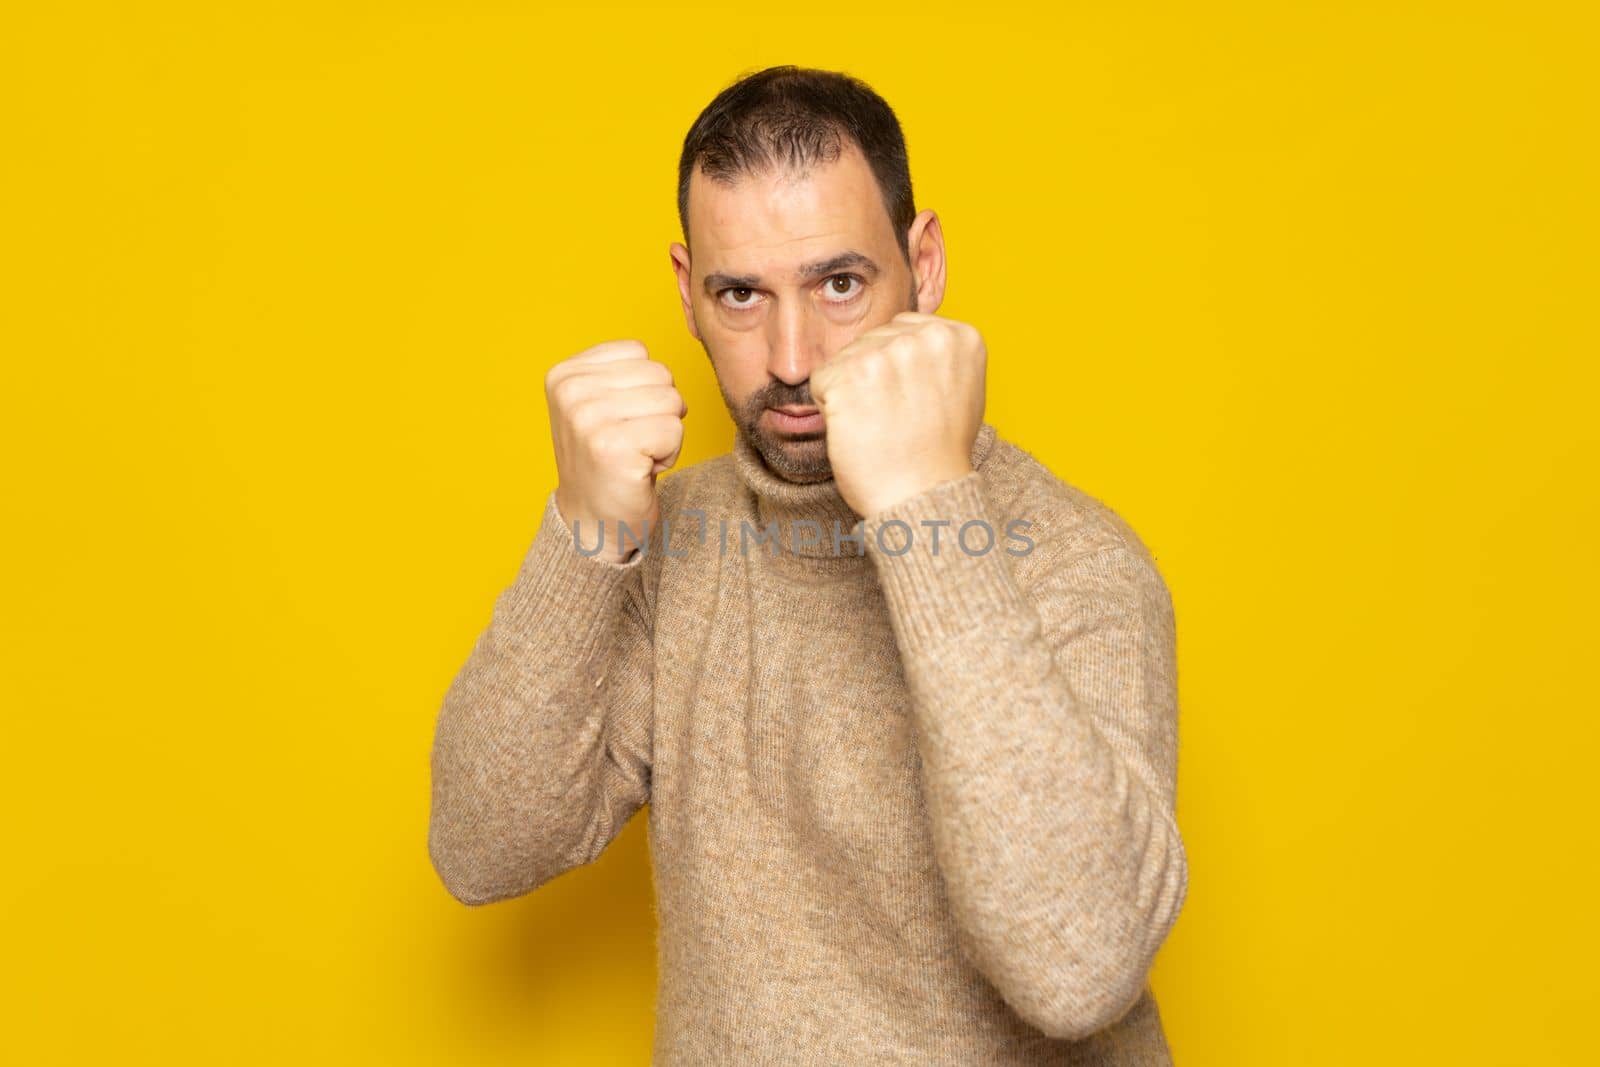 Handsome bearded man wearing turtleneck sweater over yellow background. Banging fist to fight, aggressive and angry attack, threat and violence